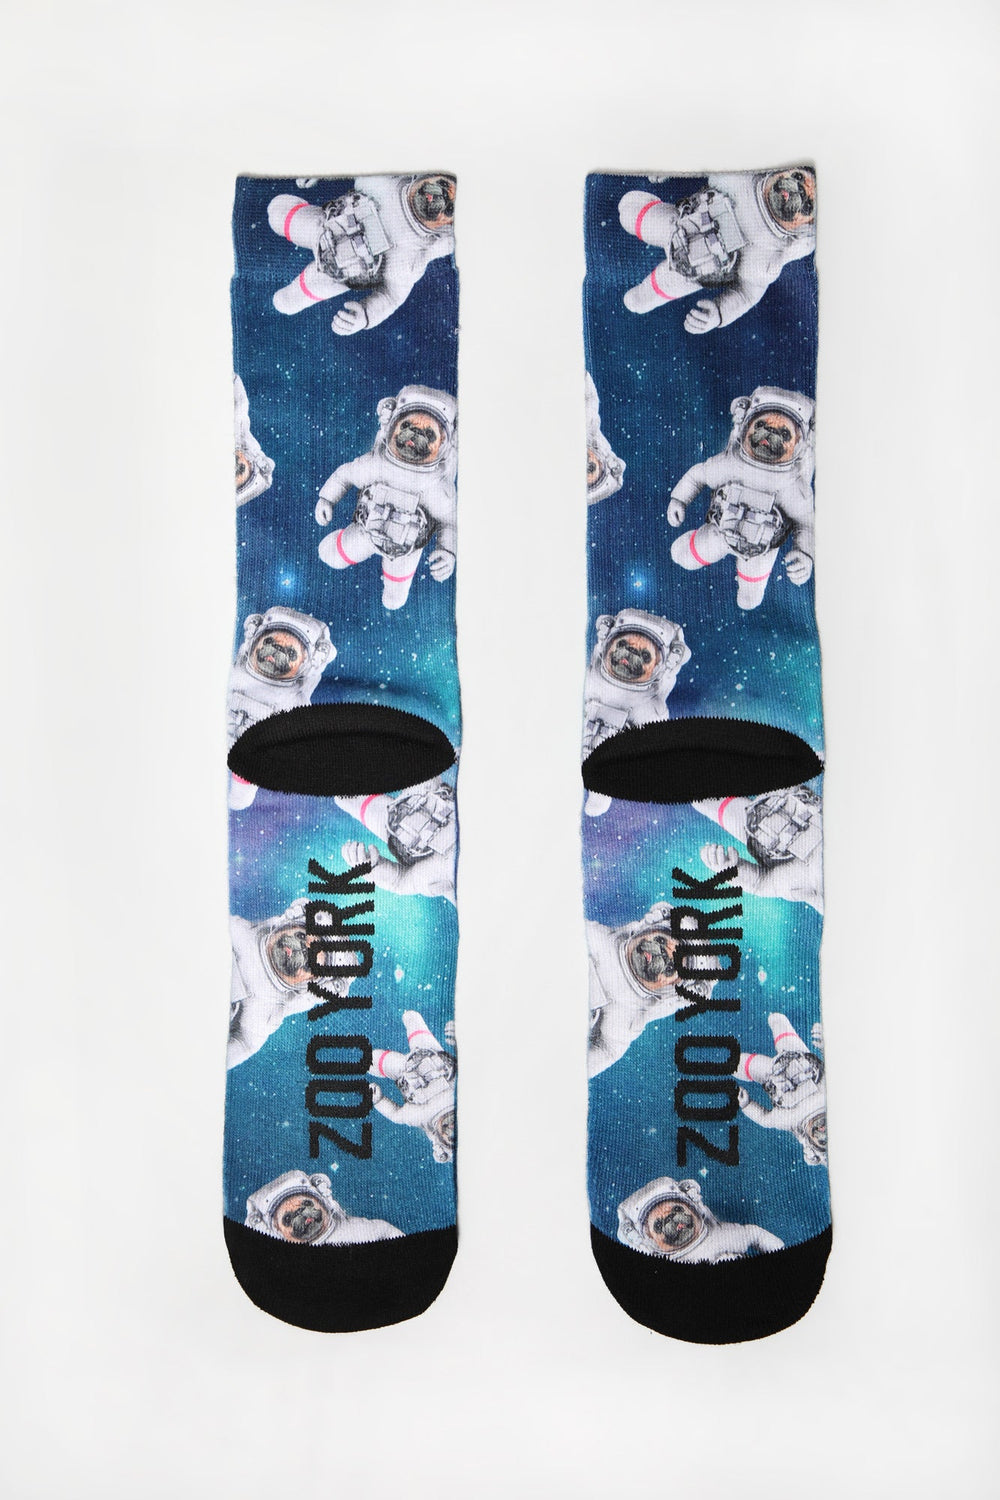 Chaussettes Pugs Astronautes Zoo York Homme Chaussettes Pugs Astronautes Zoo York Homme